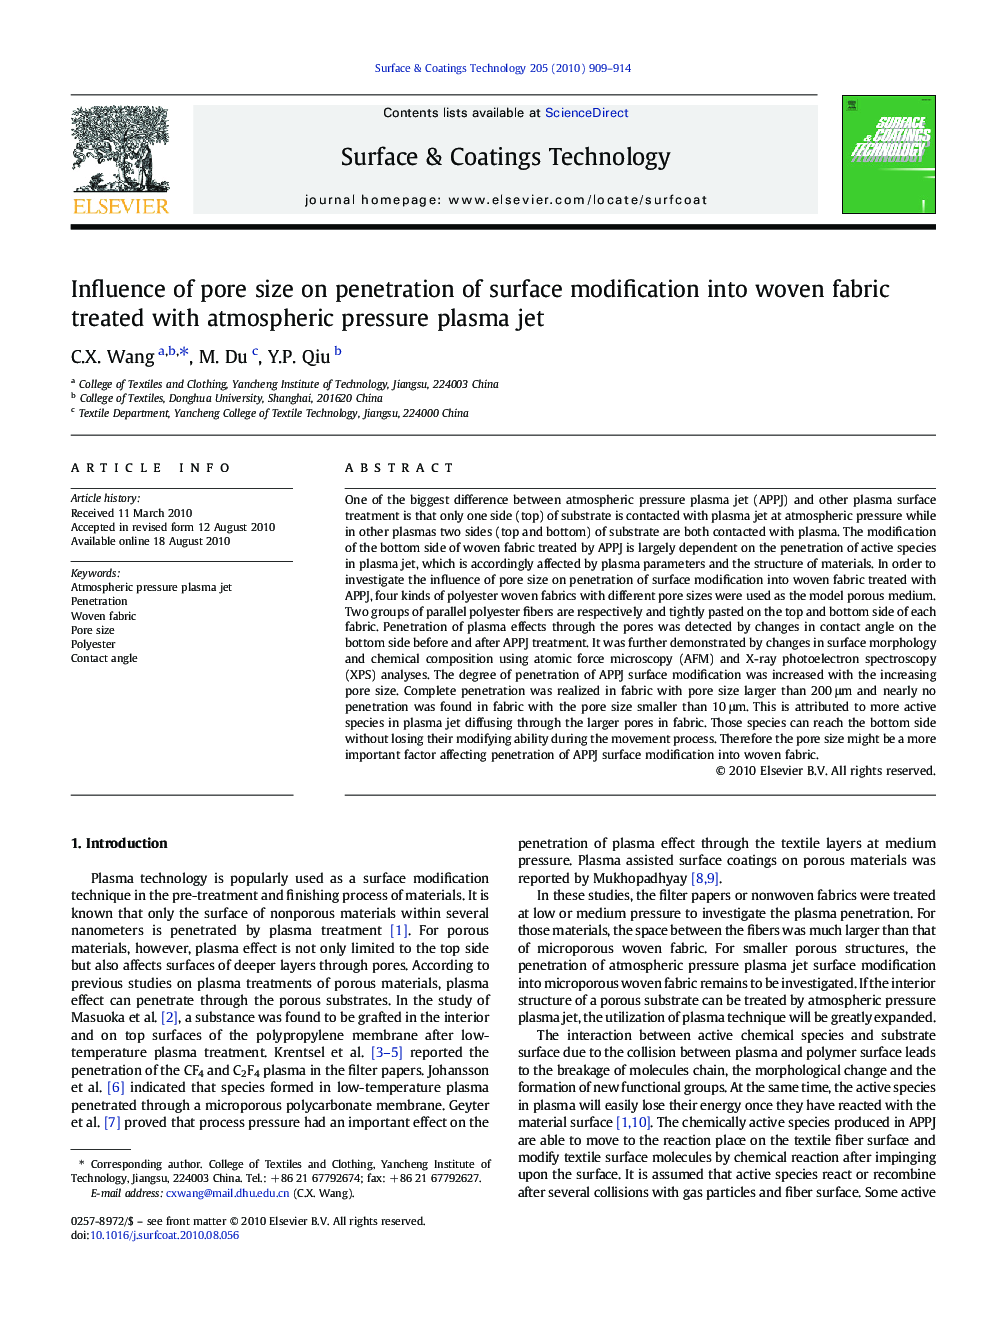 Influence of pore size on penetration of surface modification into woven fabric treated with atmospheric pressure plasma jet